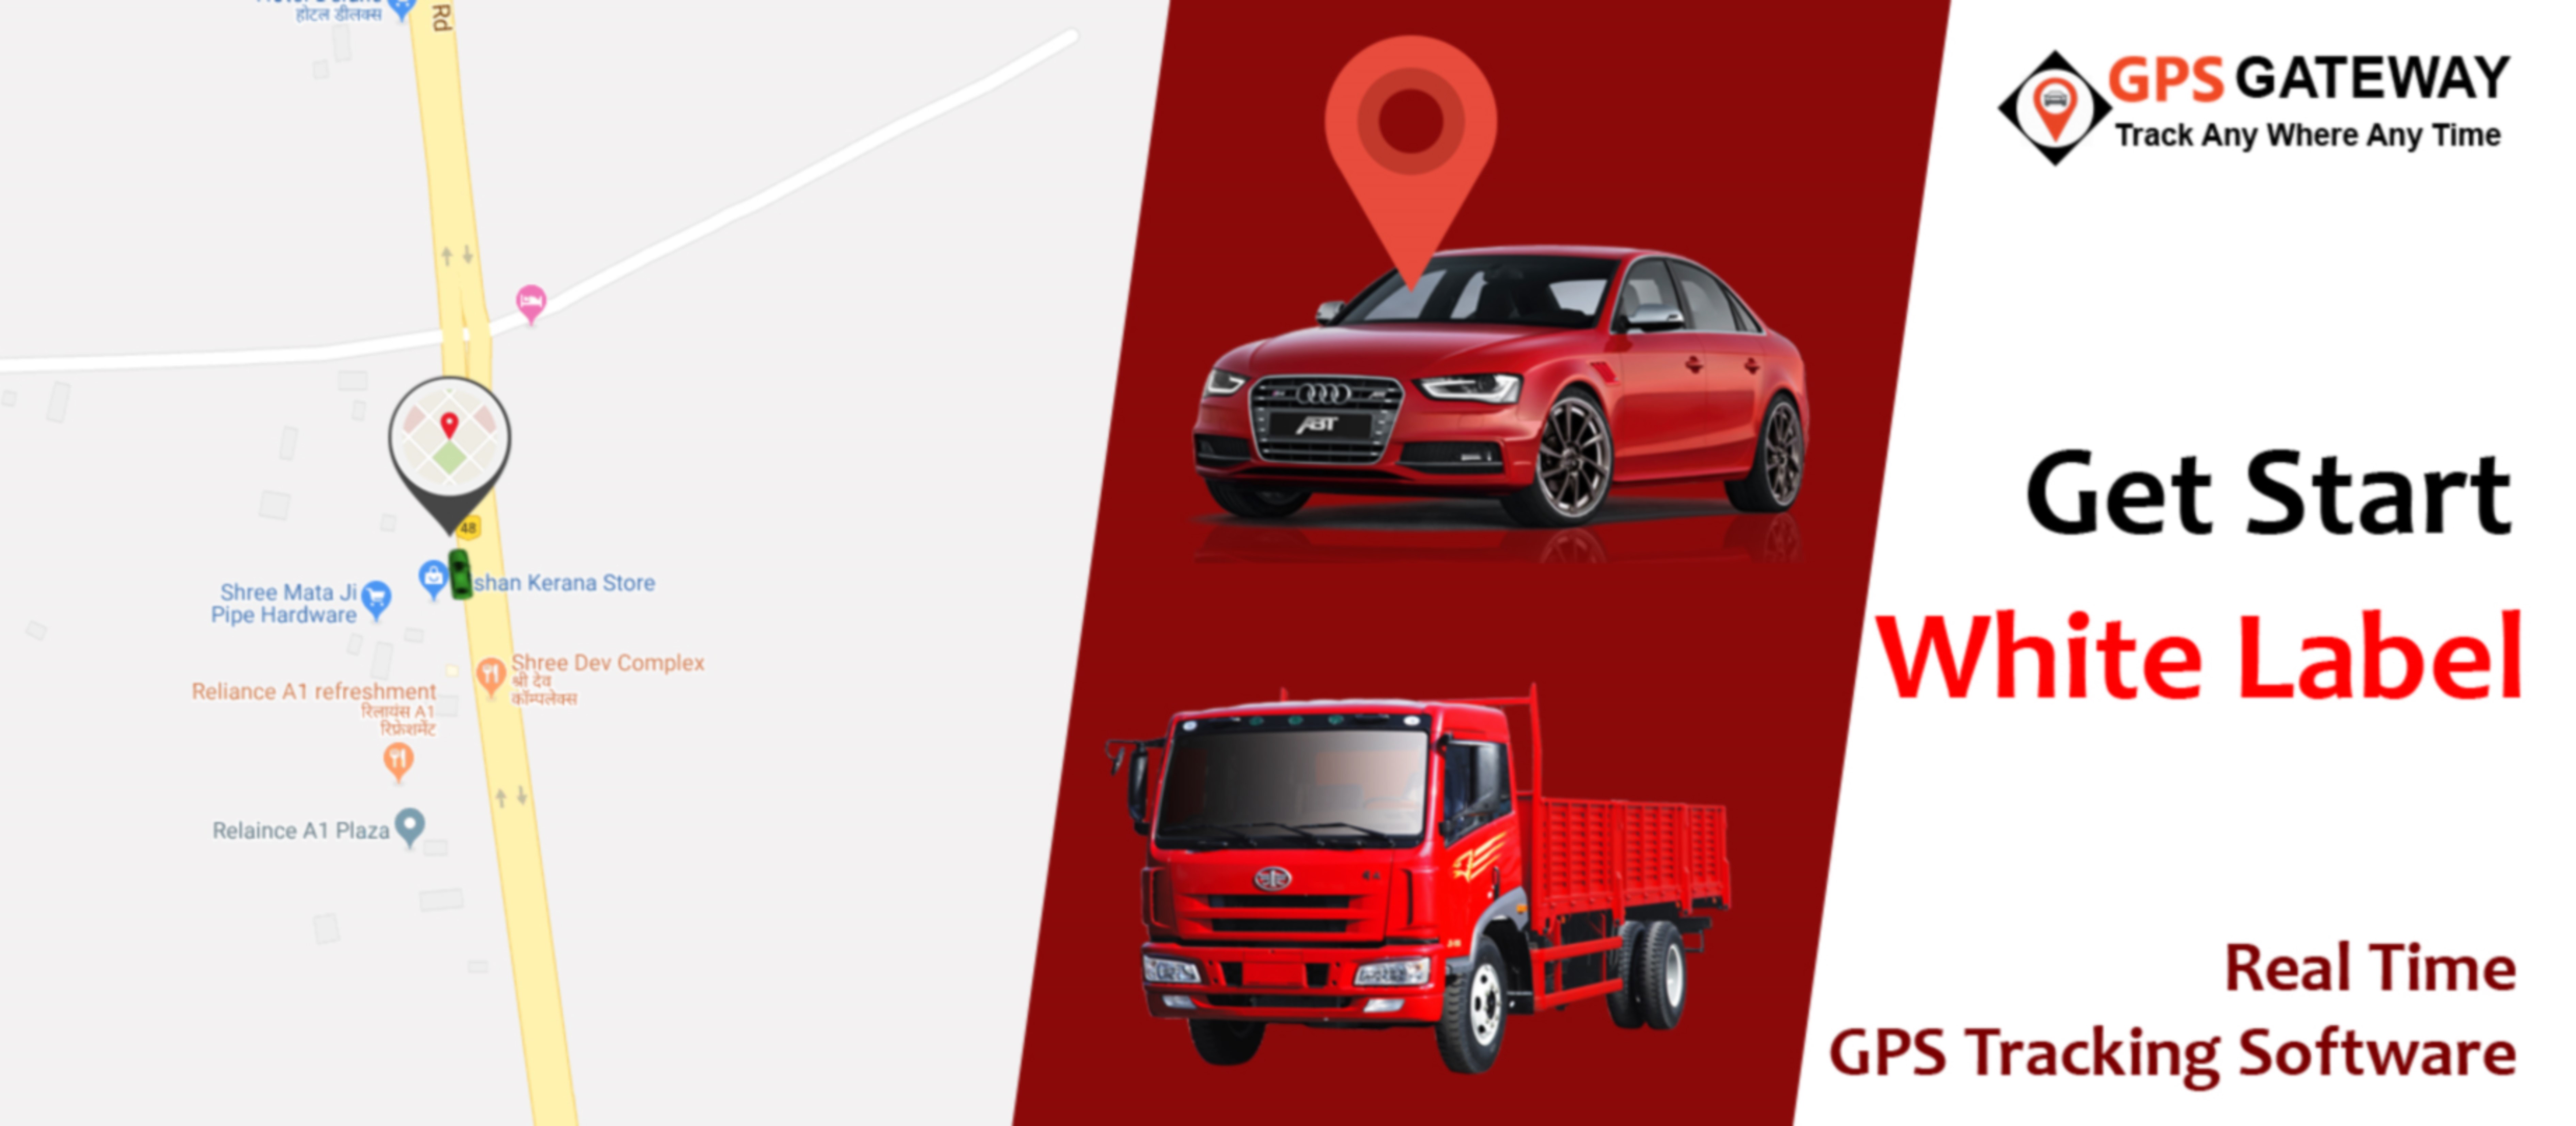 sales Staff Vehicles Tracking System, pharma mr location tracking, vehicle gps tracker, field force vehicle tracking device